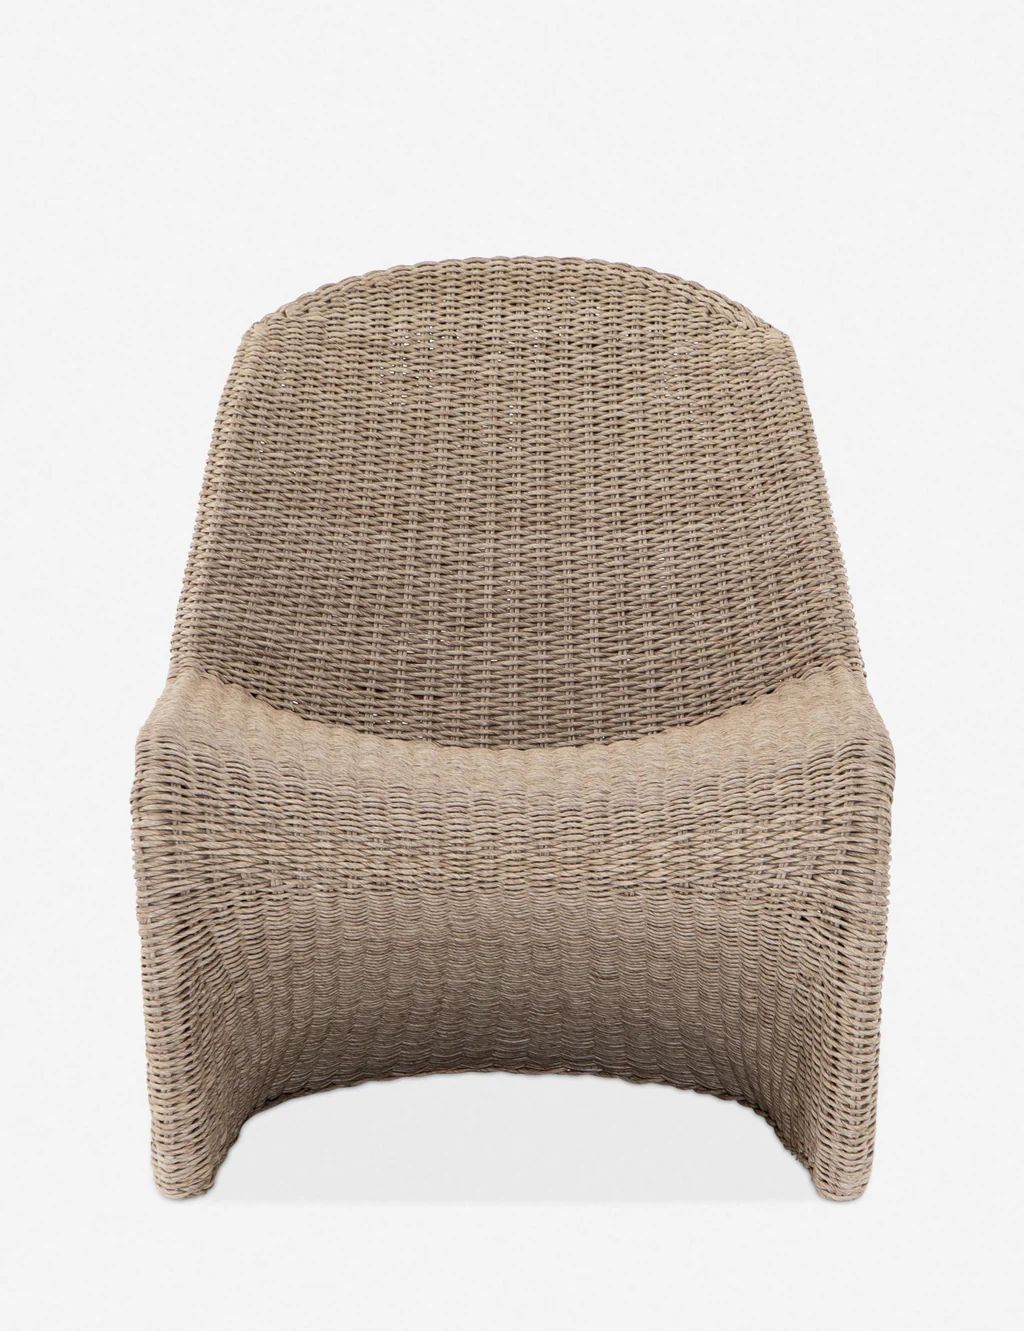 Manila Indoor / Outdoor Accent Chair | Lulu and Georgia 